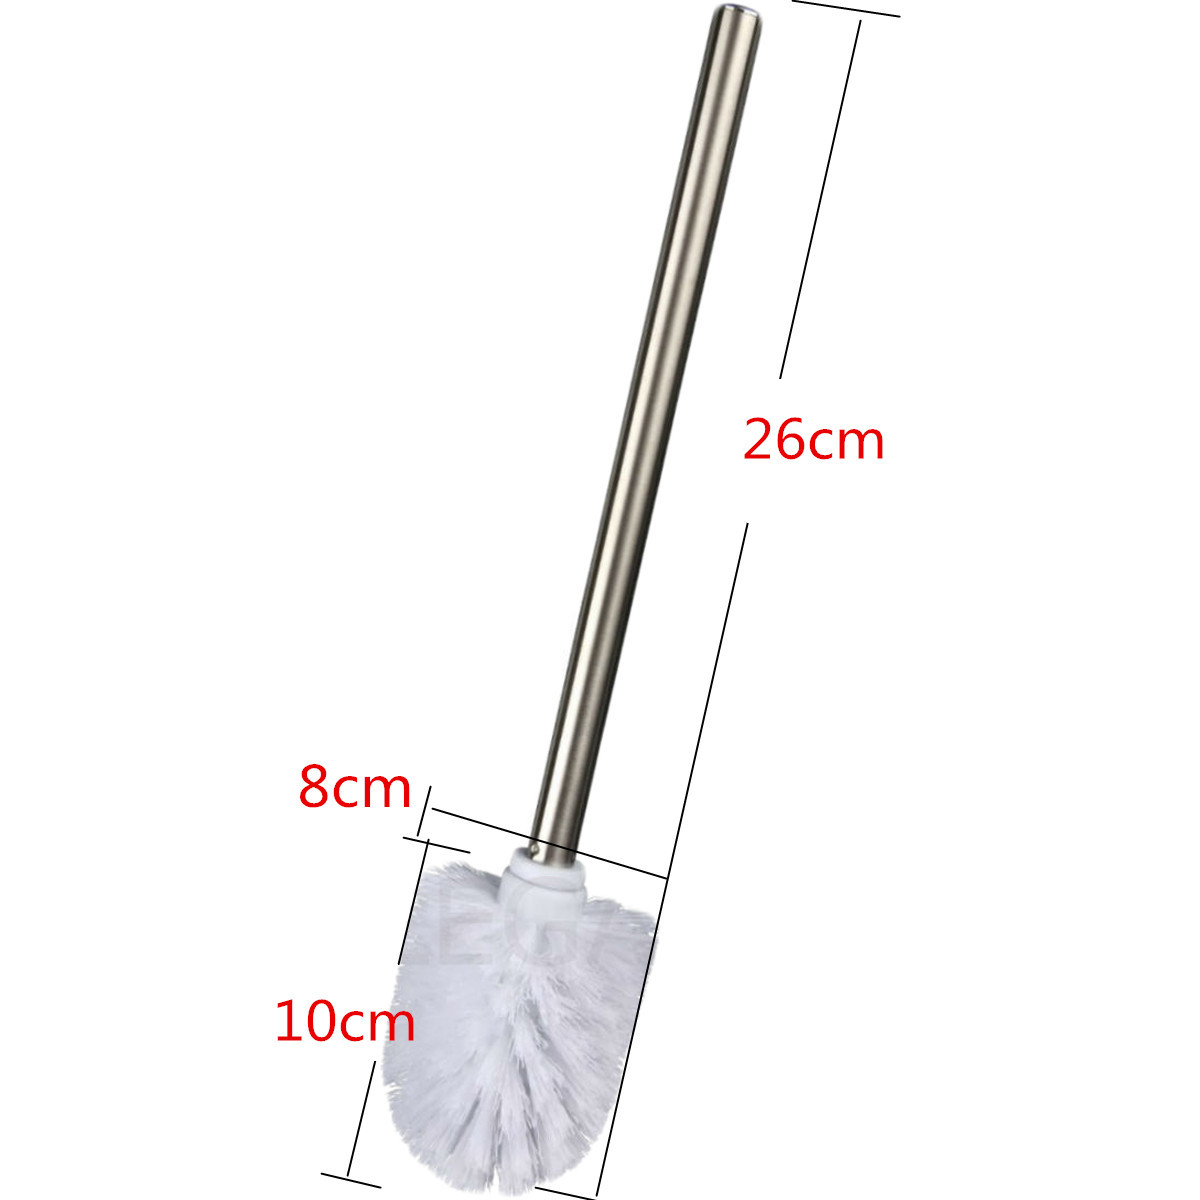 Stainless-Steel-WC-Bathroom-Cleaning-Toilet-Brush-White-Head-Holders-Cleaning-Brushes-1137680-2